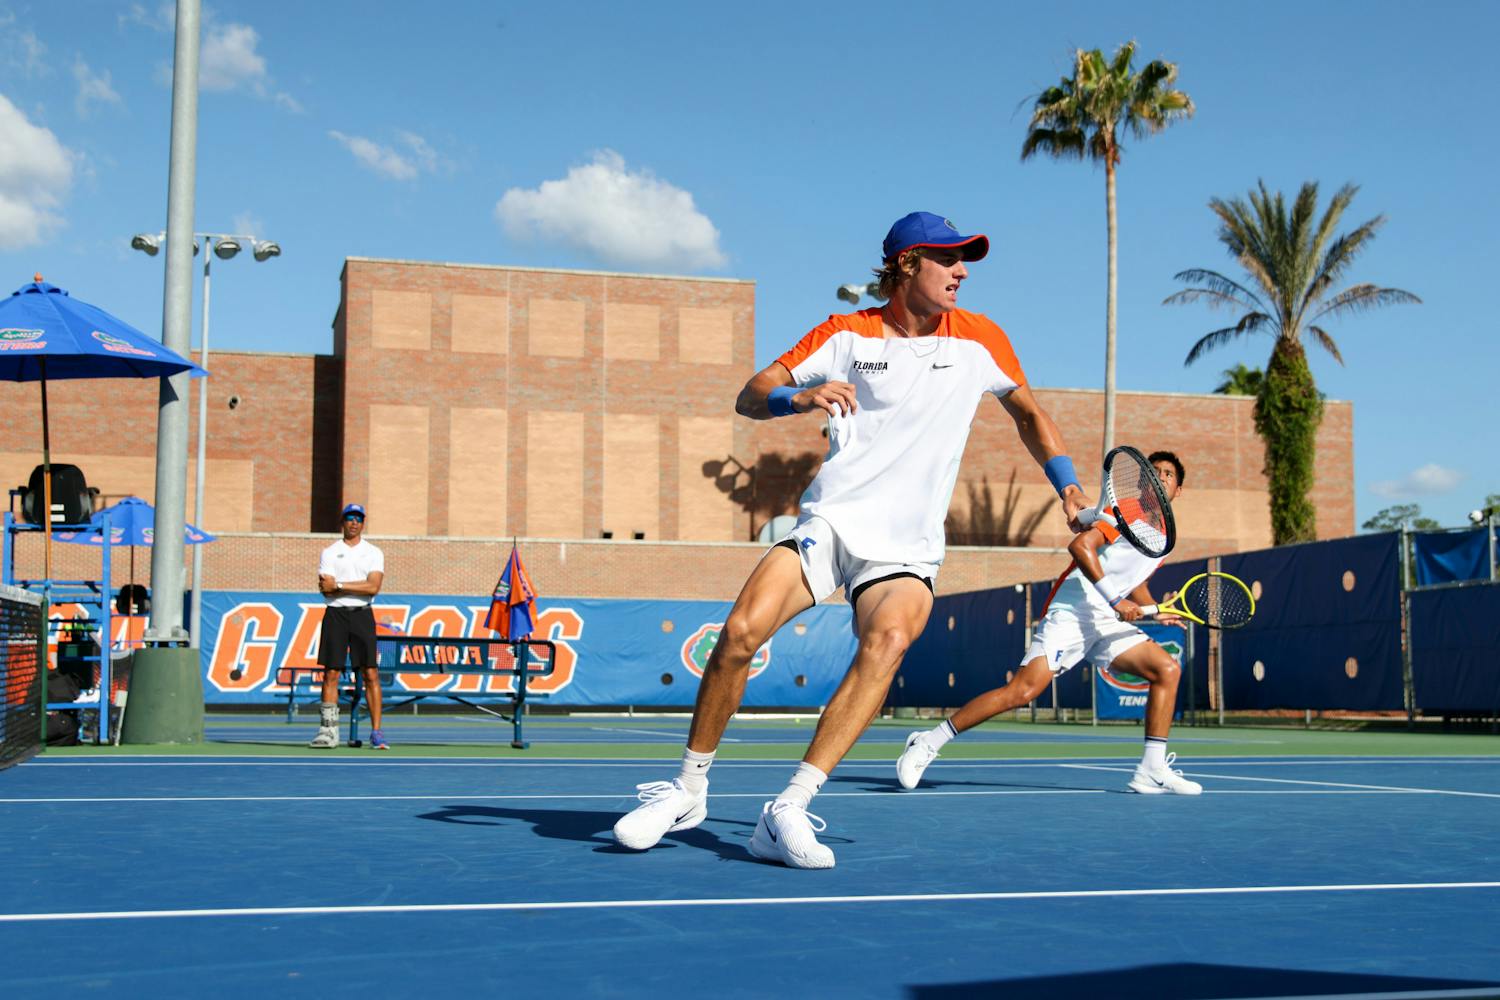 Florida sophomore Nate Bonetto (left) and freshman Tanapatt Nirundorn (right) compete in their doubles match during the Gators' 6-1 win over the Arkansas Razorbacks Friday, March 24, 2023.